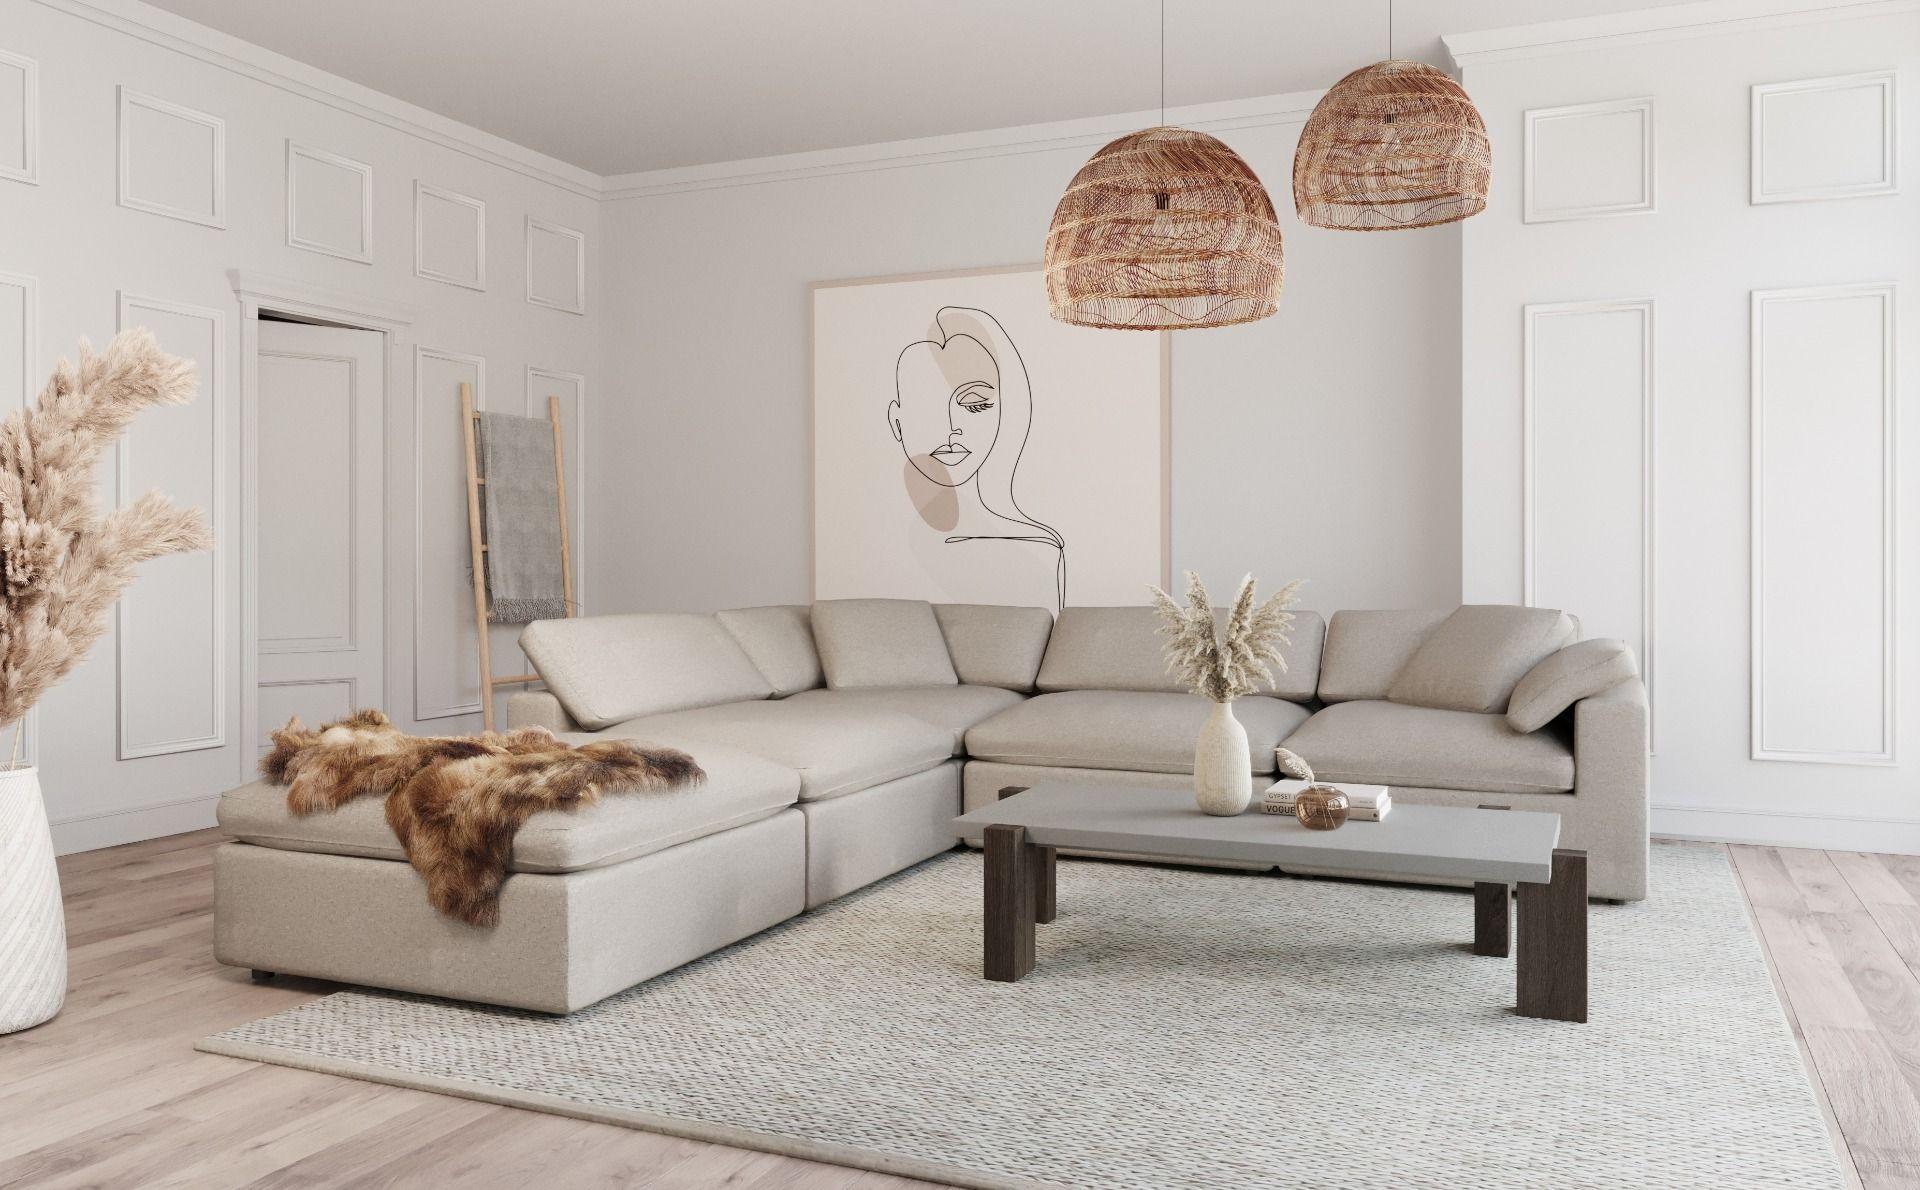 Contemporary, Modern Modular Sectional Sofa VGMBMB-1833-CRM VGMBMB-1833-CRM in Cream Fabric